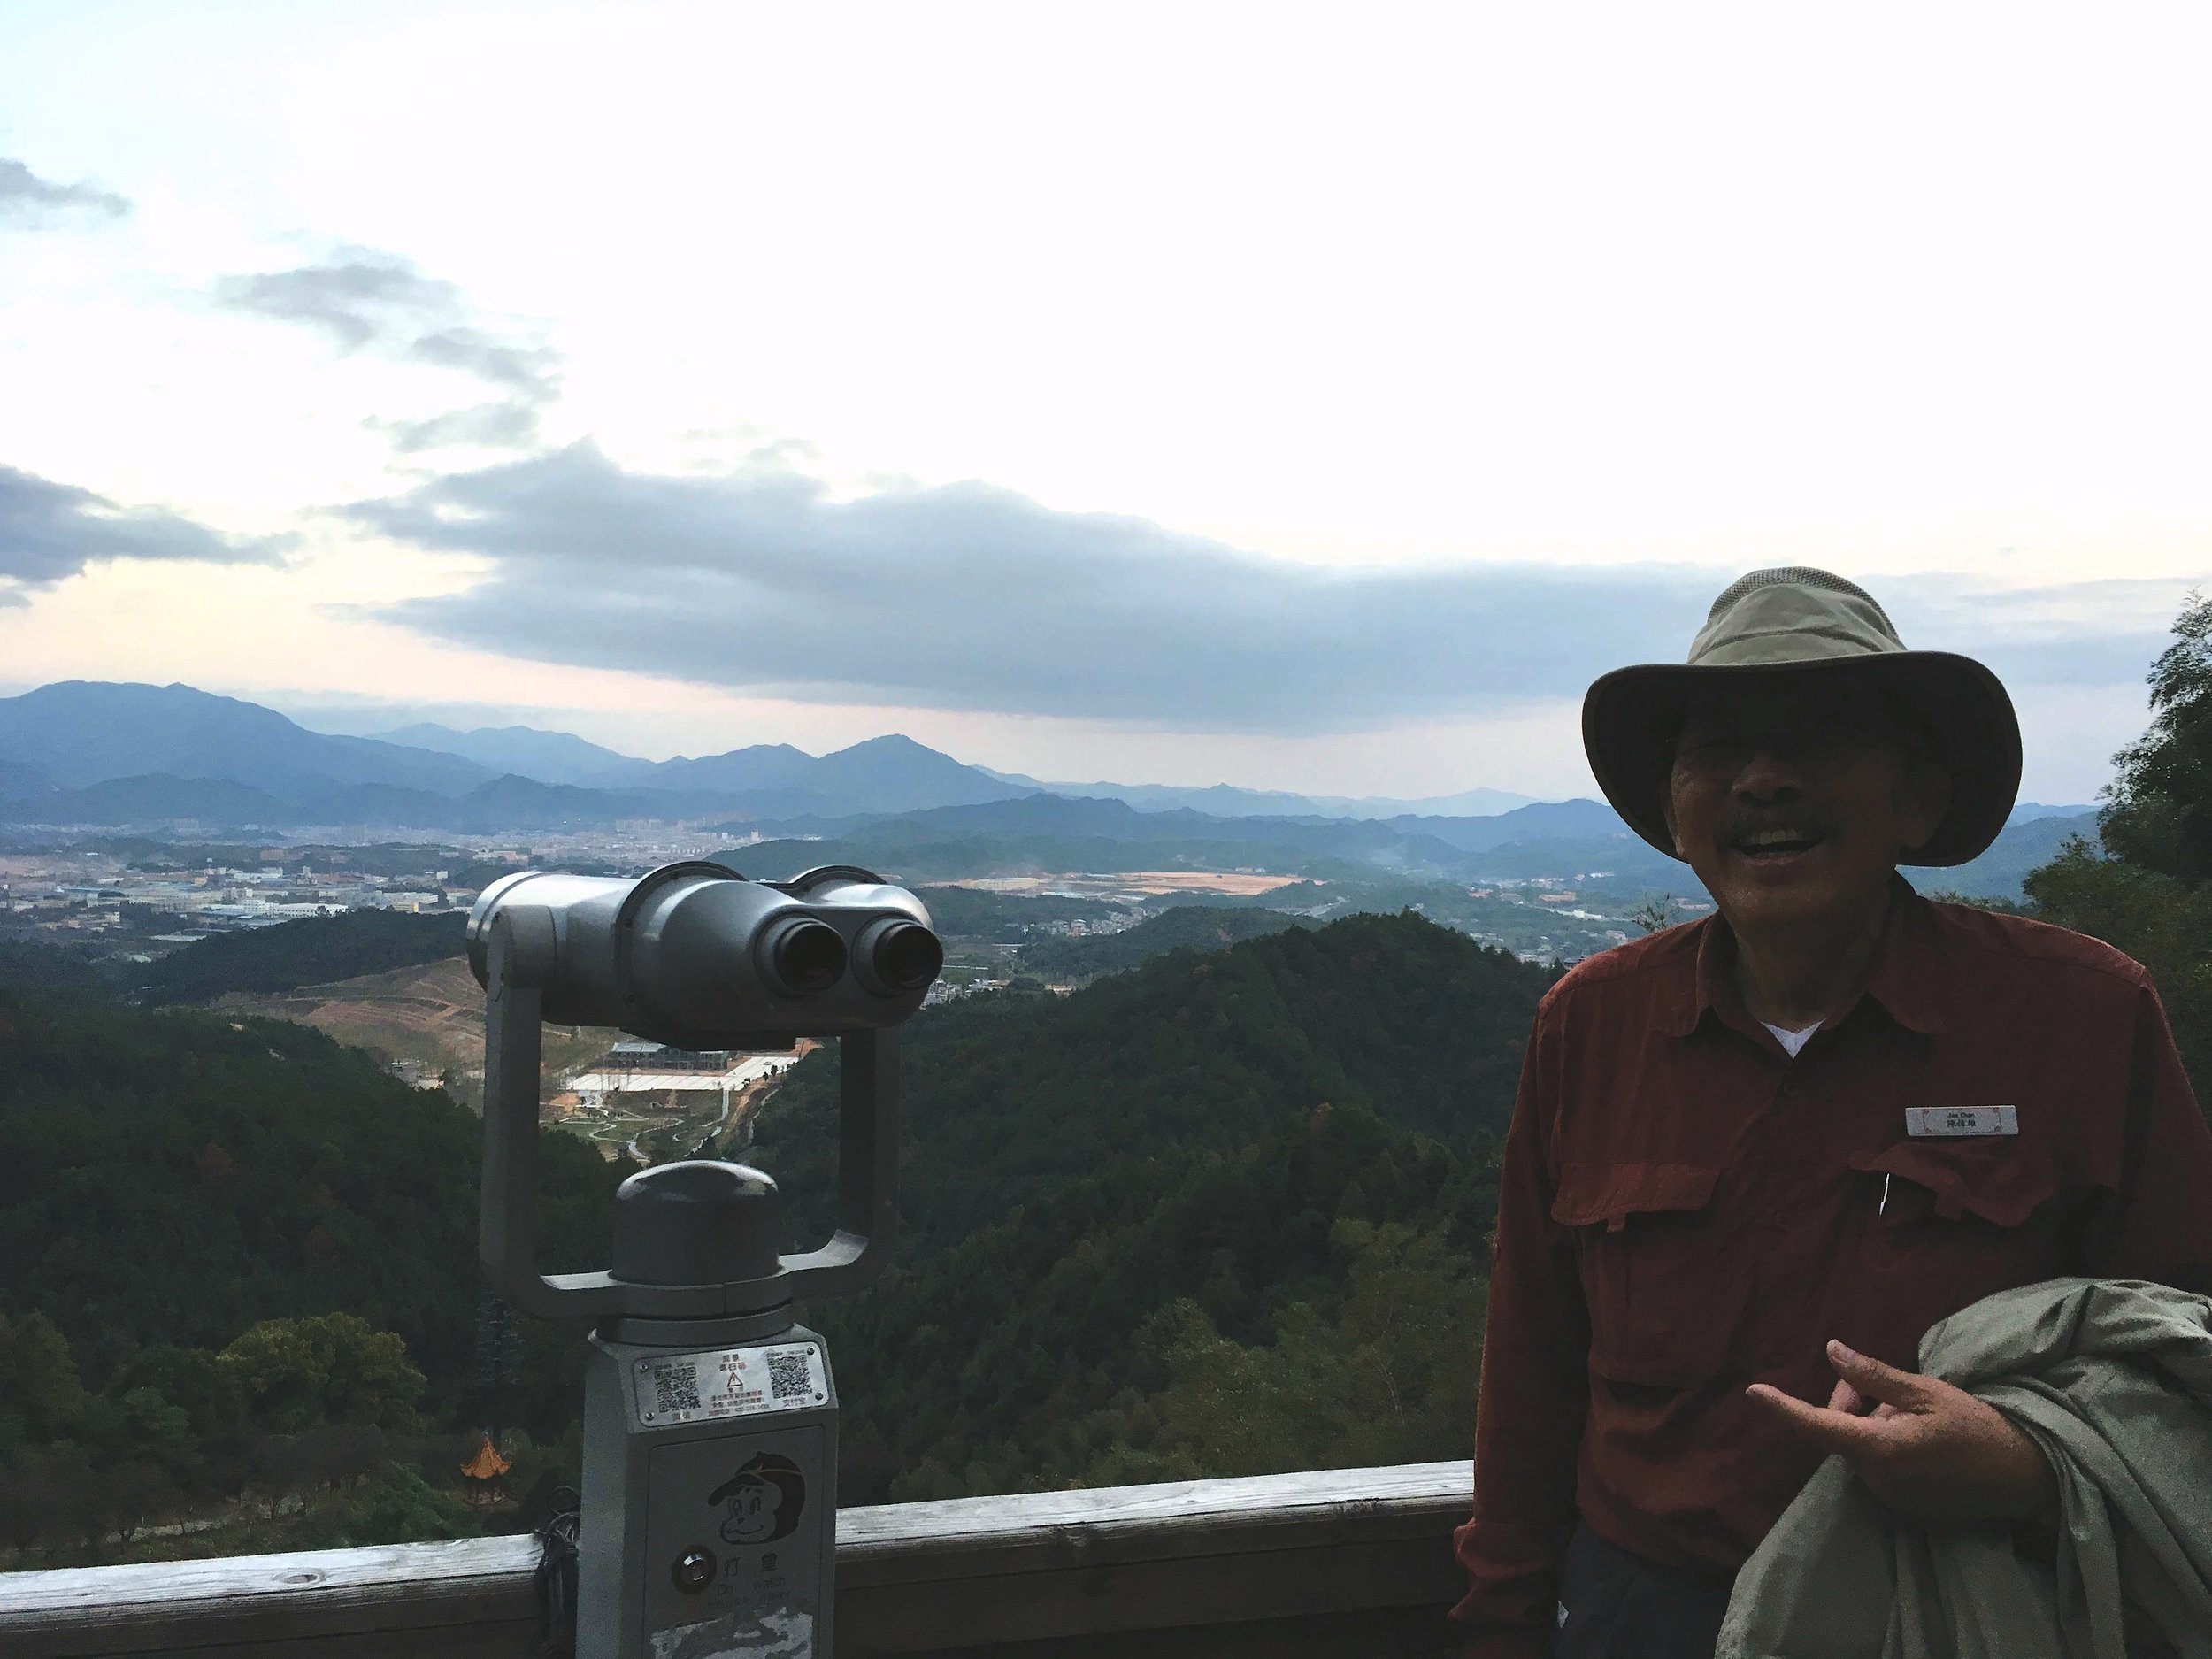 On the observation deck in Jiangxi Province